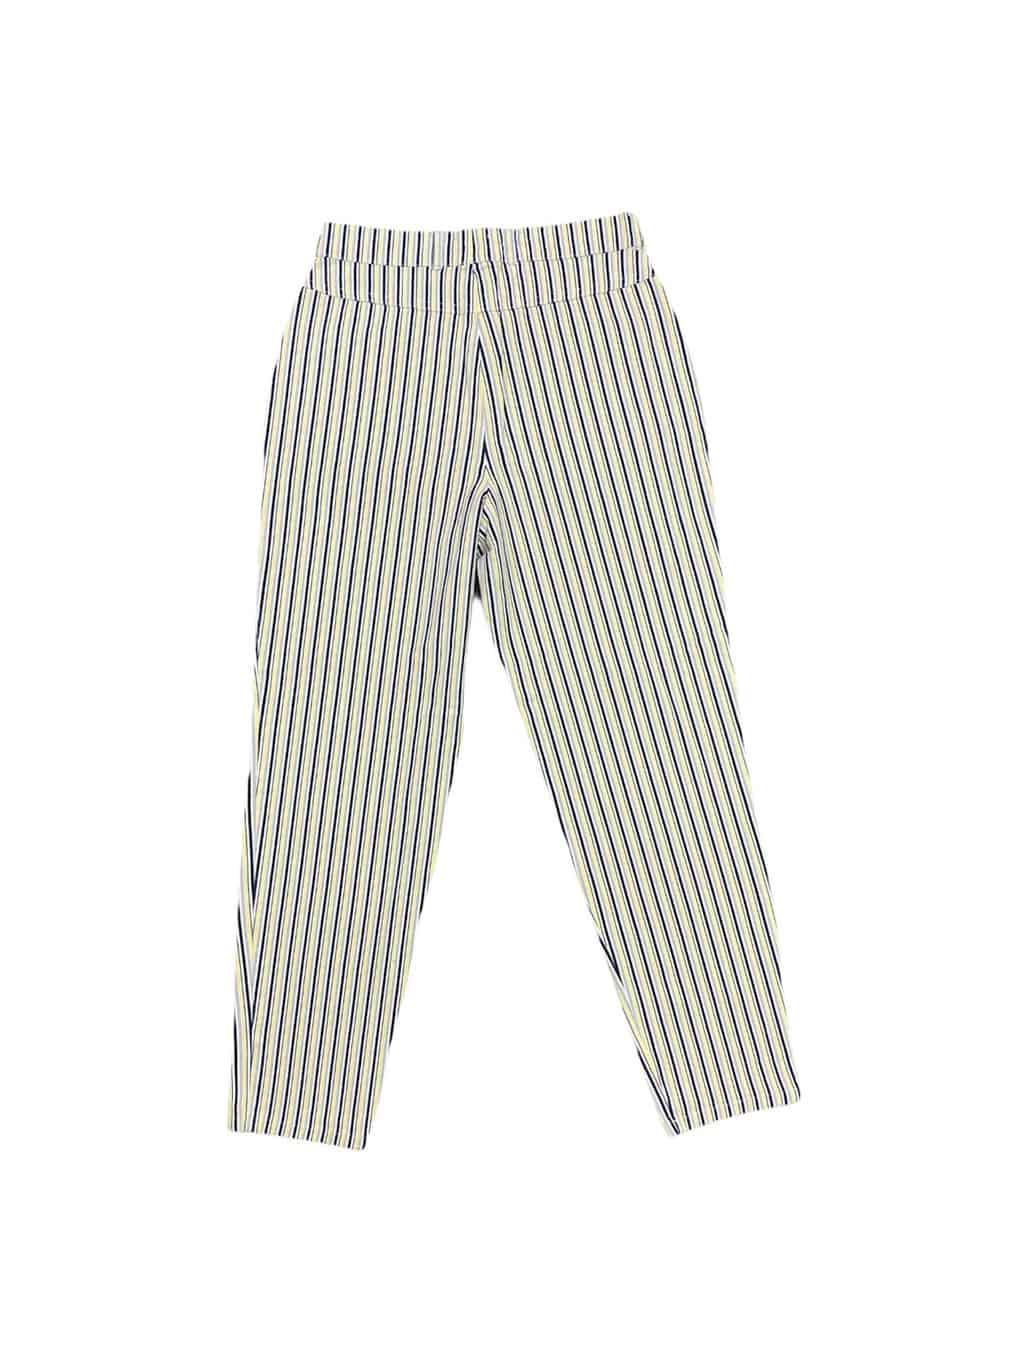 Vintage 90s high rise striped trousers in yellow navy & grey - W29 x L29.5  - St Cyr Vintage